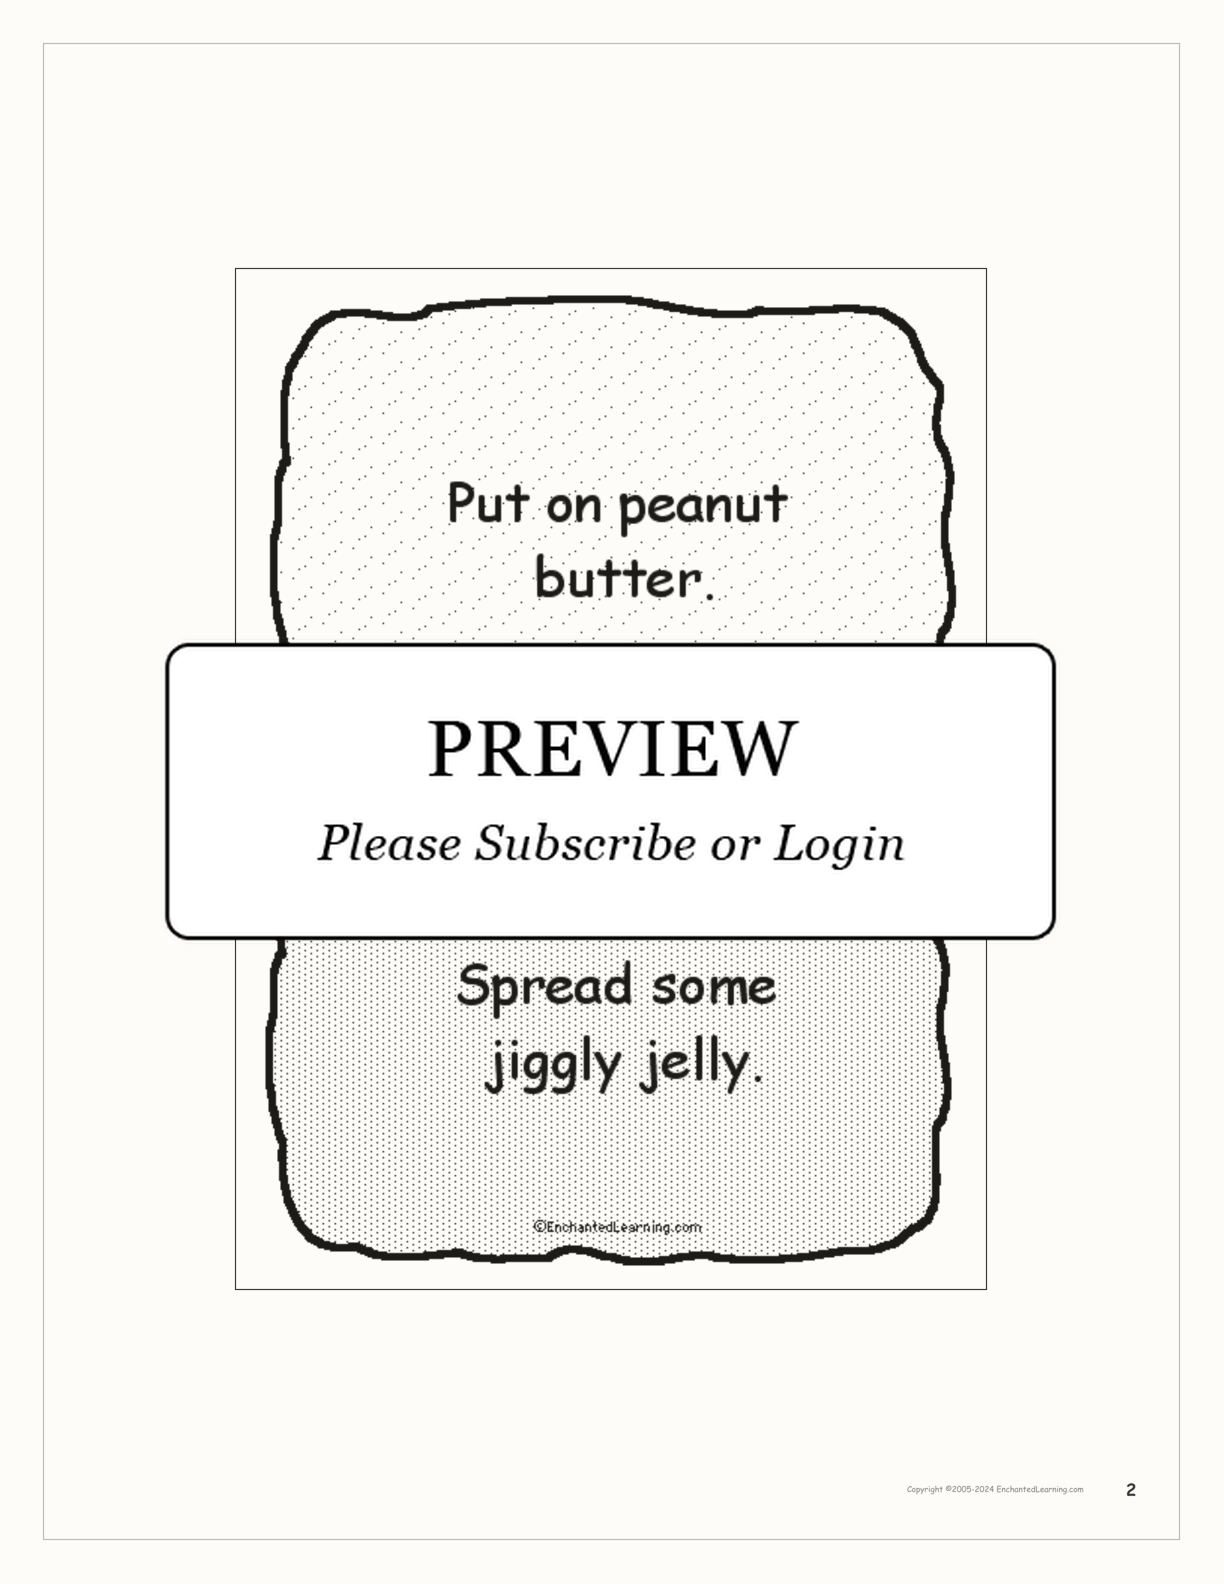 'Make a Silly Sandwich' Book interactive printout page 2